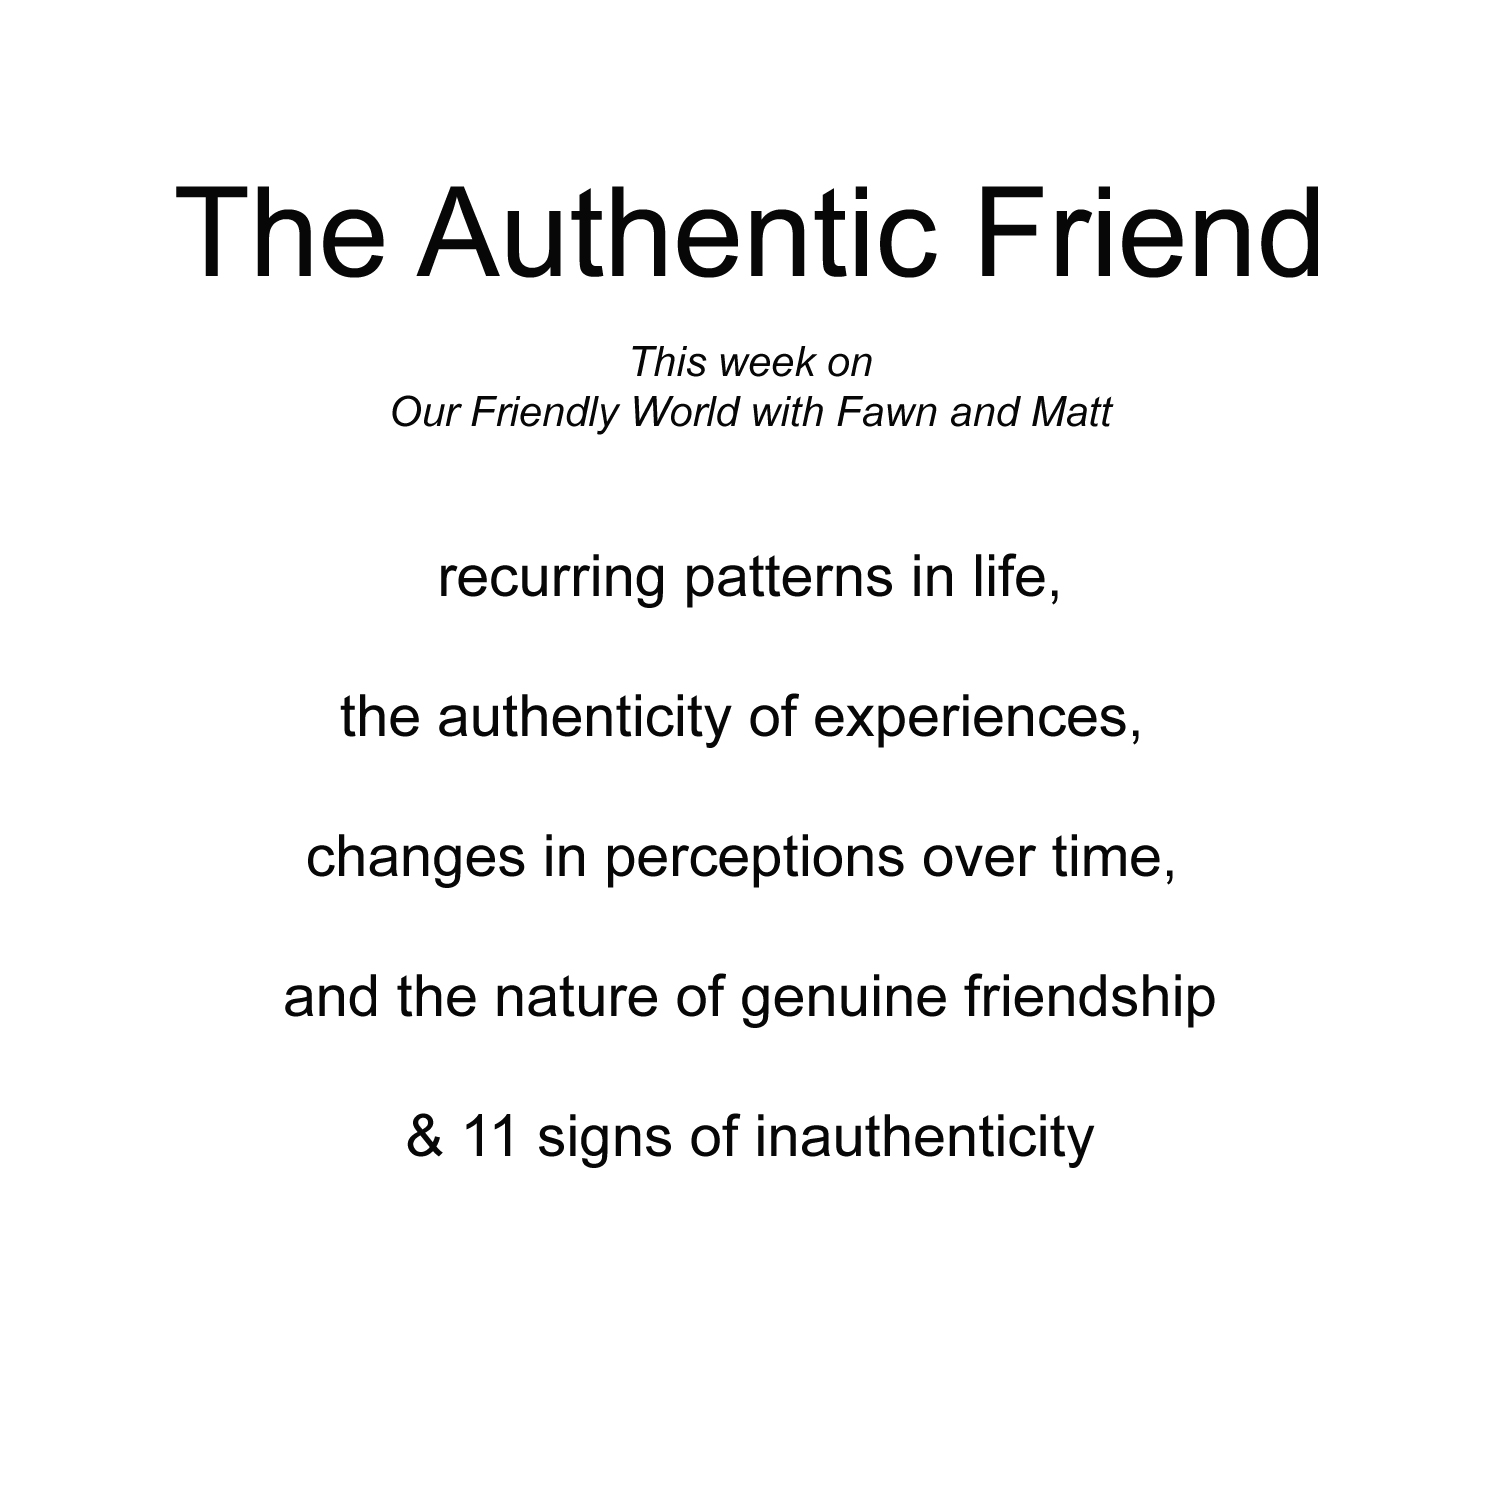 The Authentic Friend